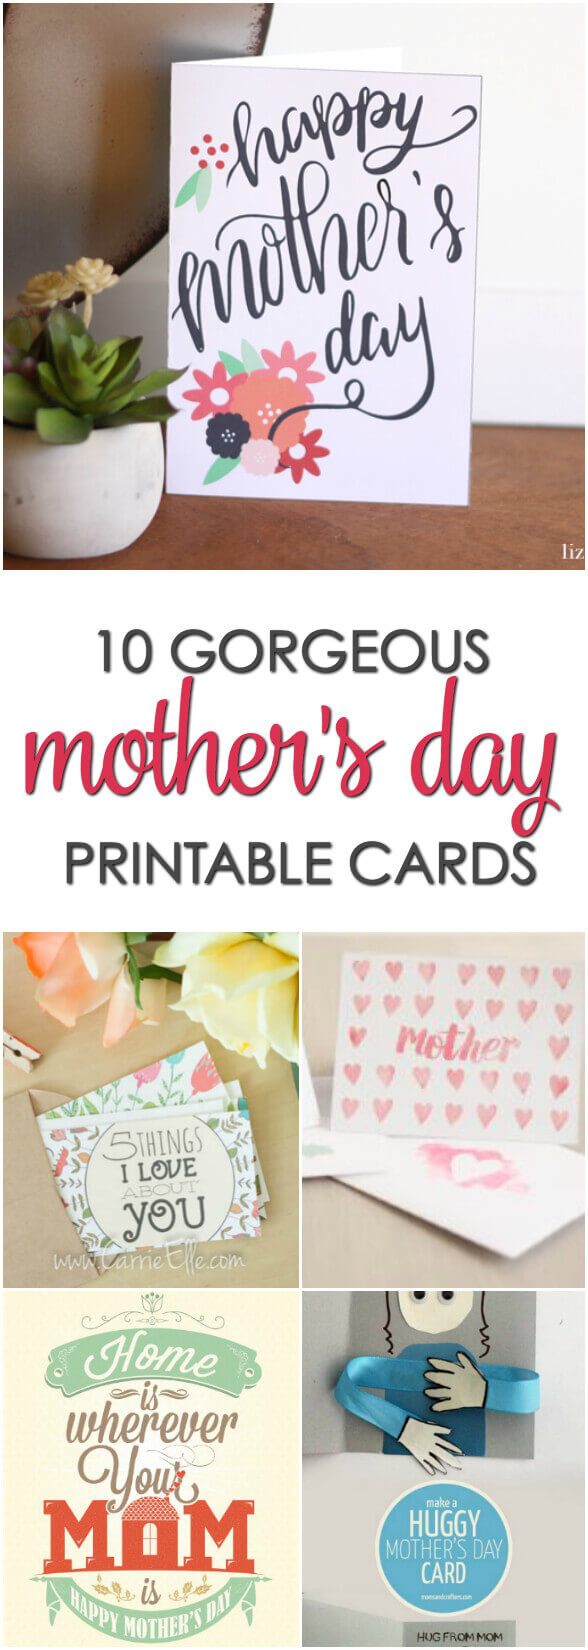 10 Gorgeous Mother's Day Printable Cards - Surprise mom with one of these free Mother's Day Card Printables